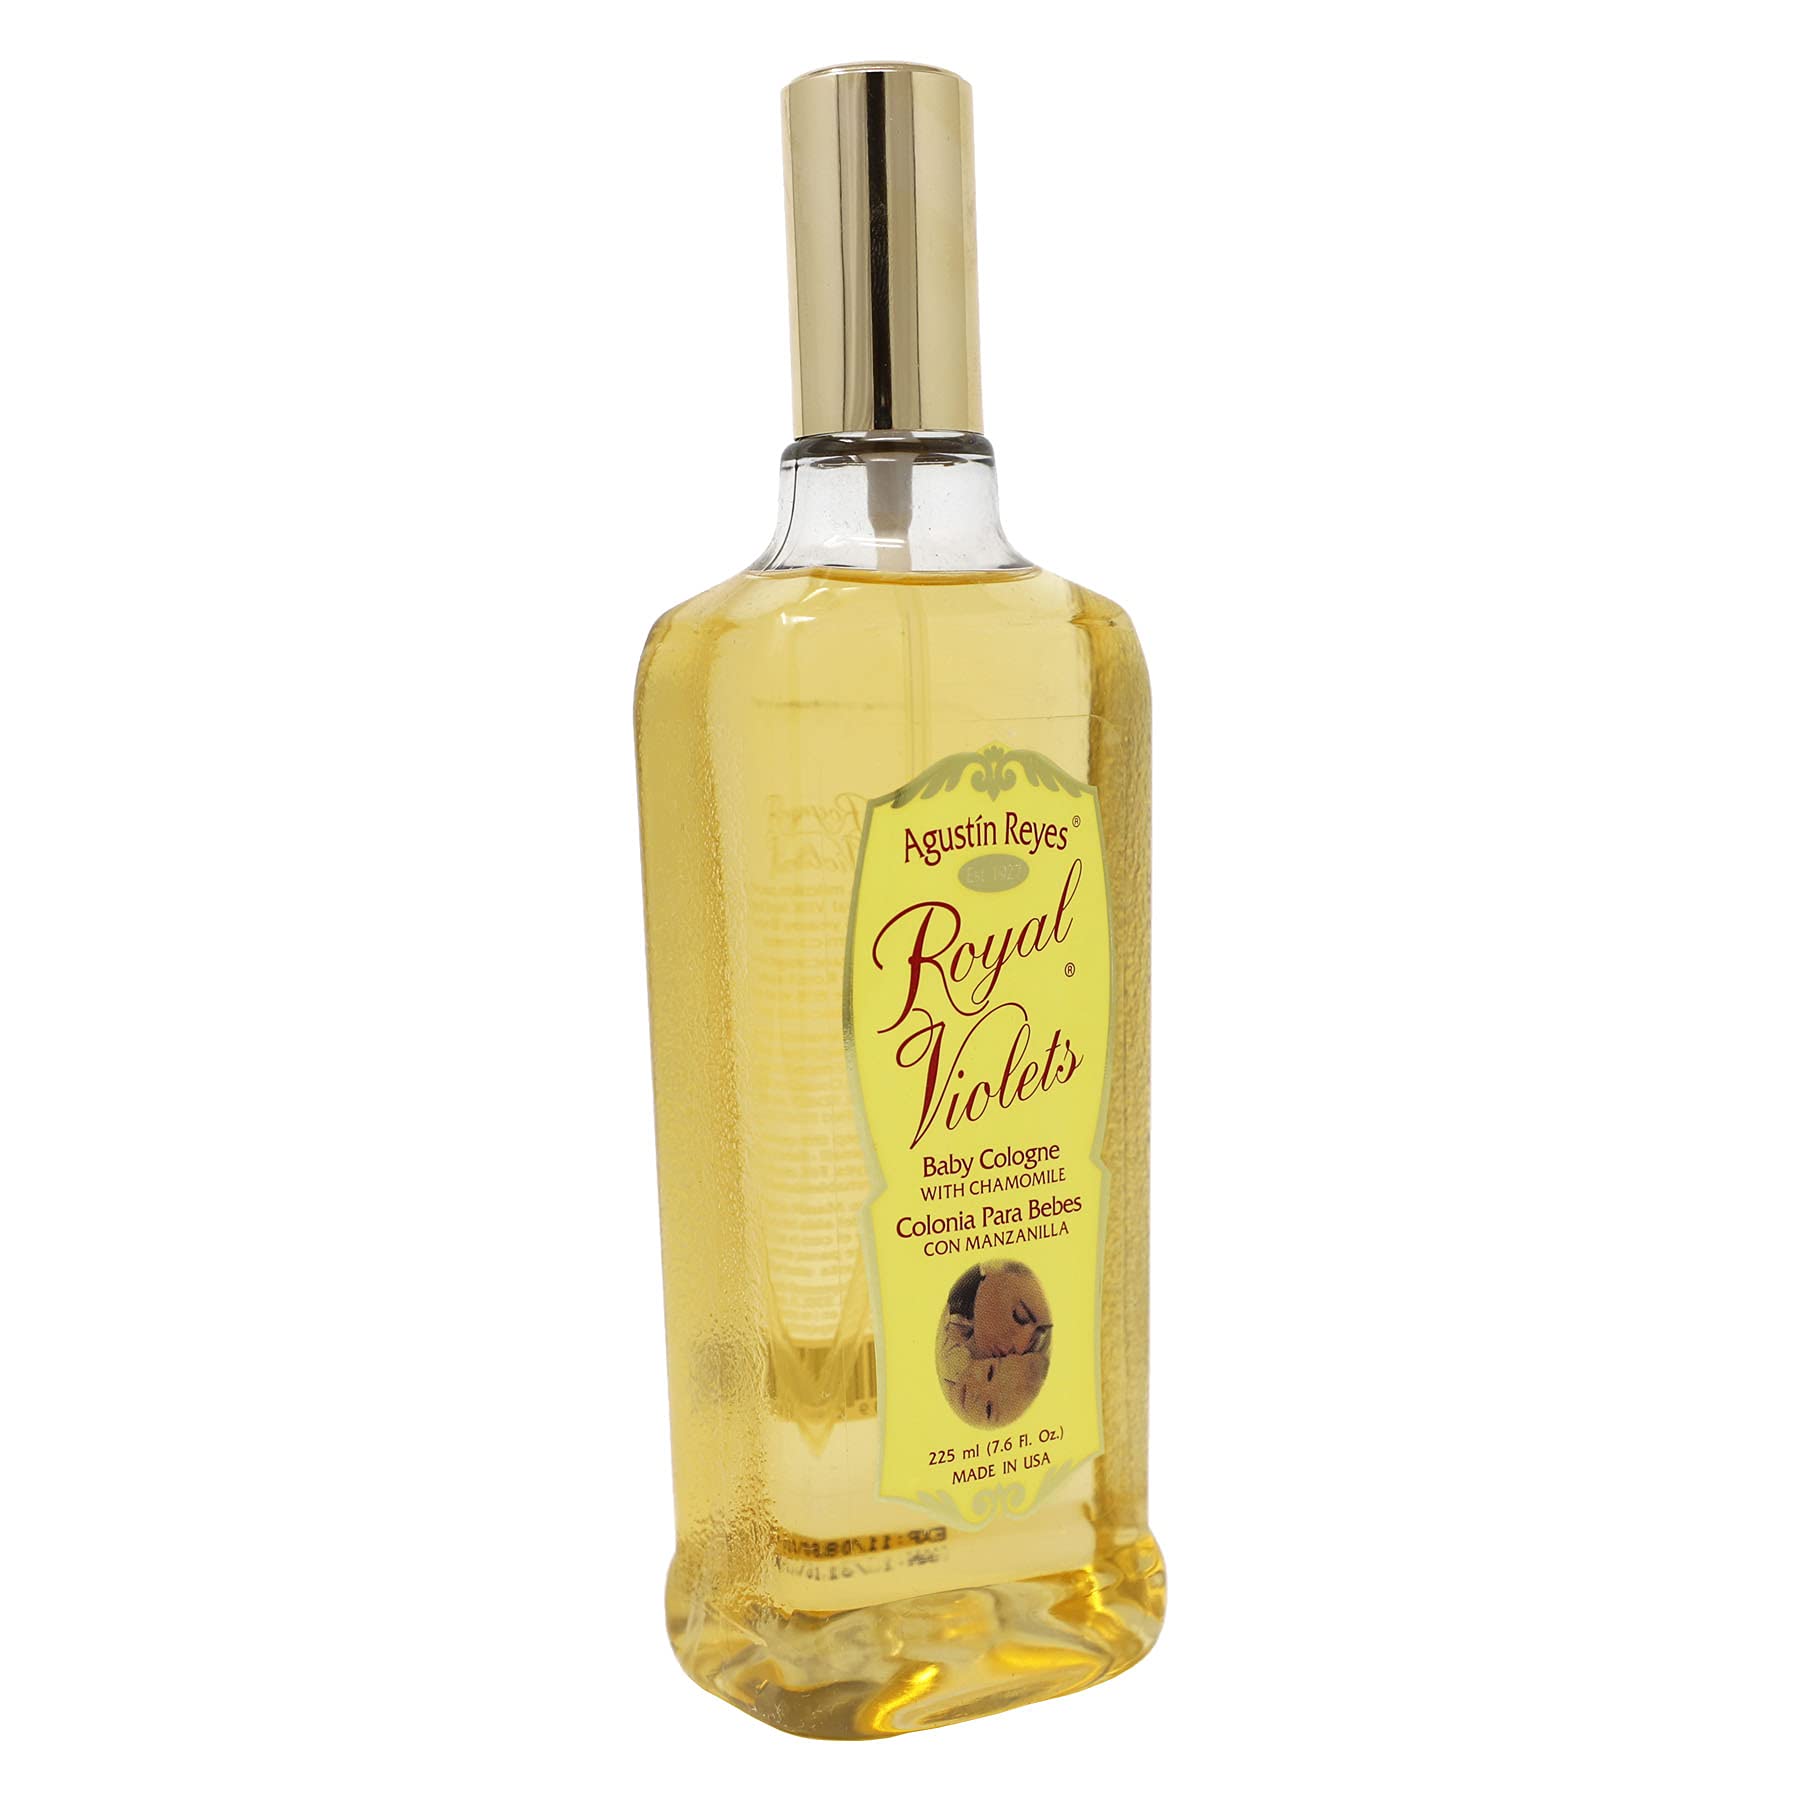 Royal Violets Baby Cologne, with Chamomile to Gently Refresh Your Baby, Delicate Scent, 7.6 Fl Oz, Spray Bottle.